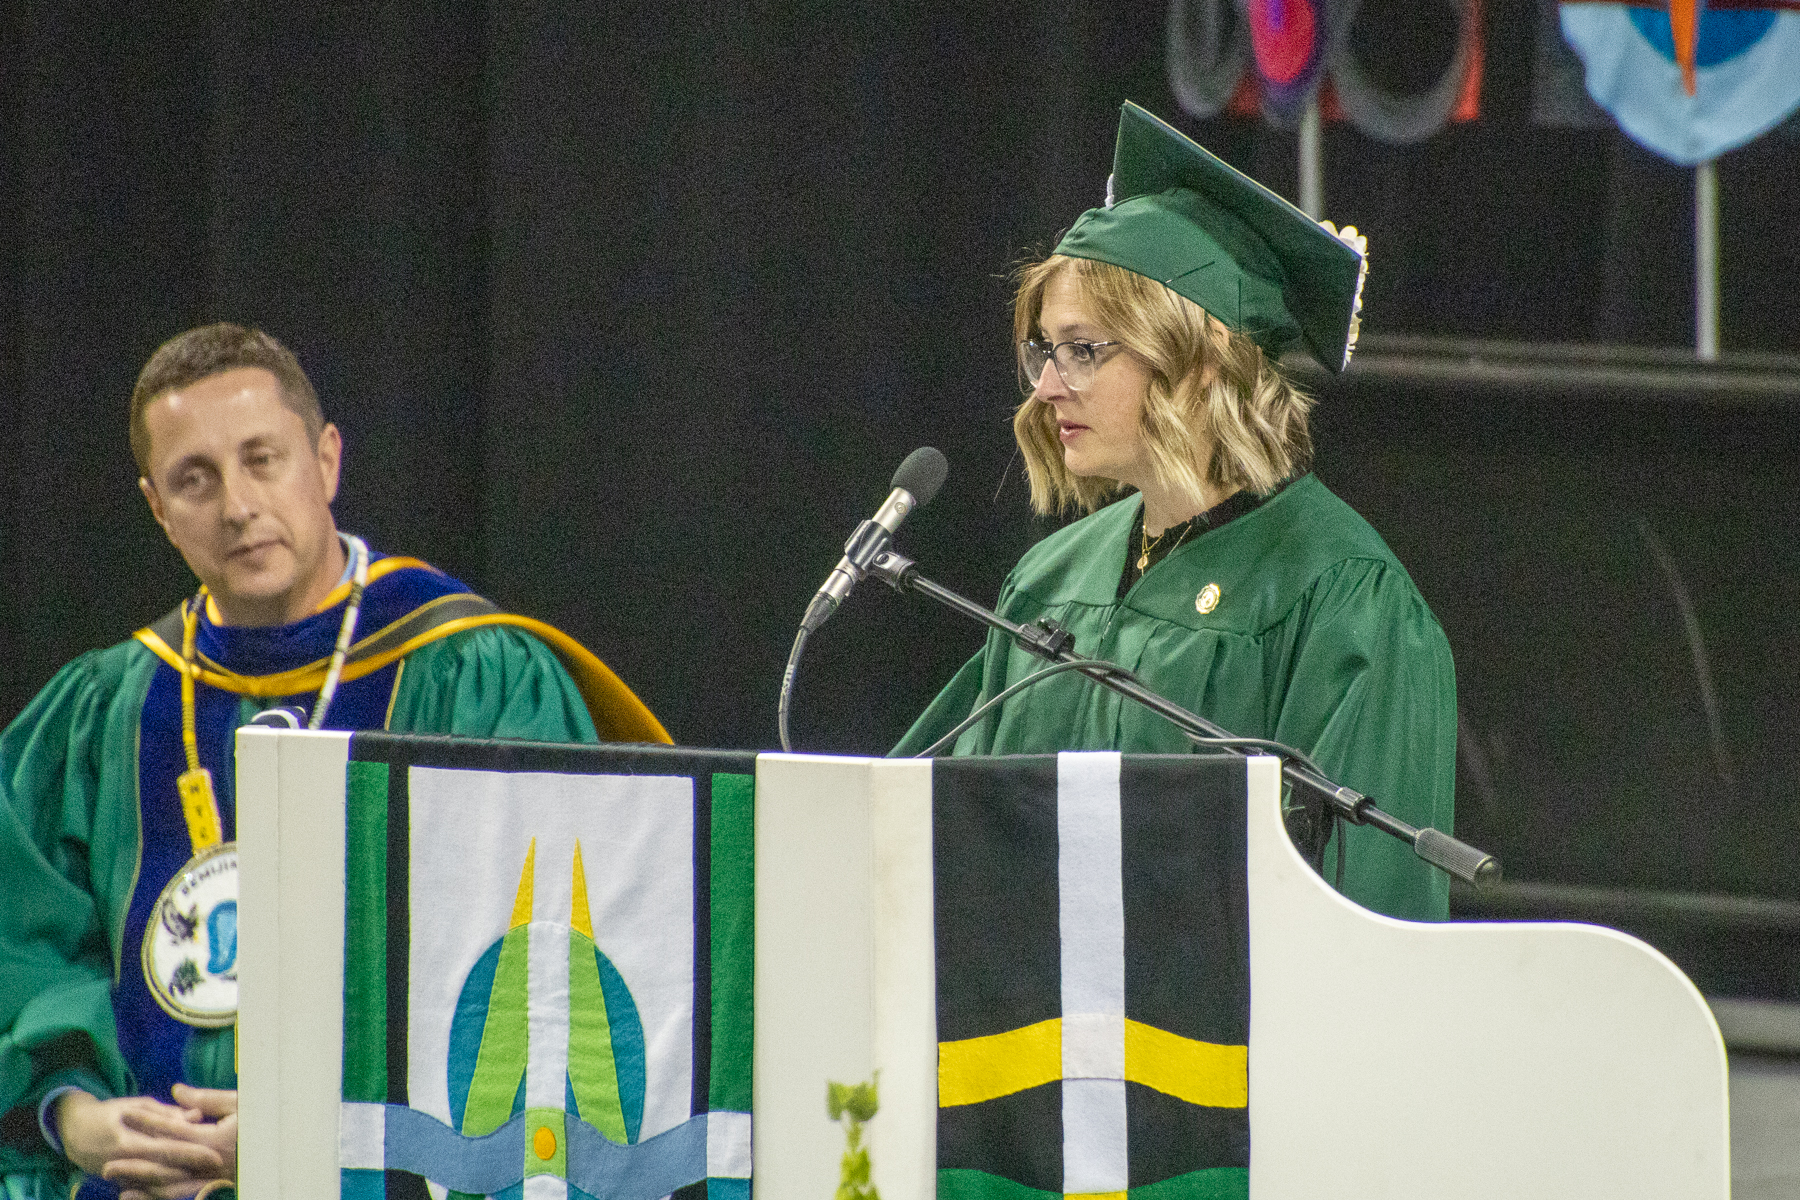 Tiffany Anderson speaks during commencement